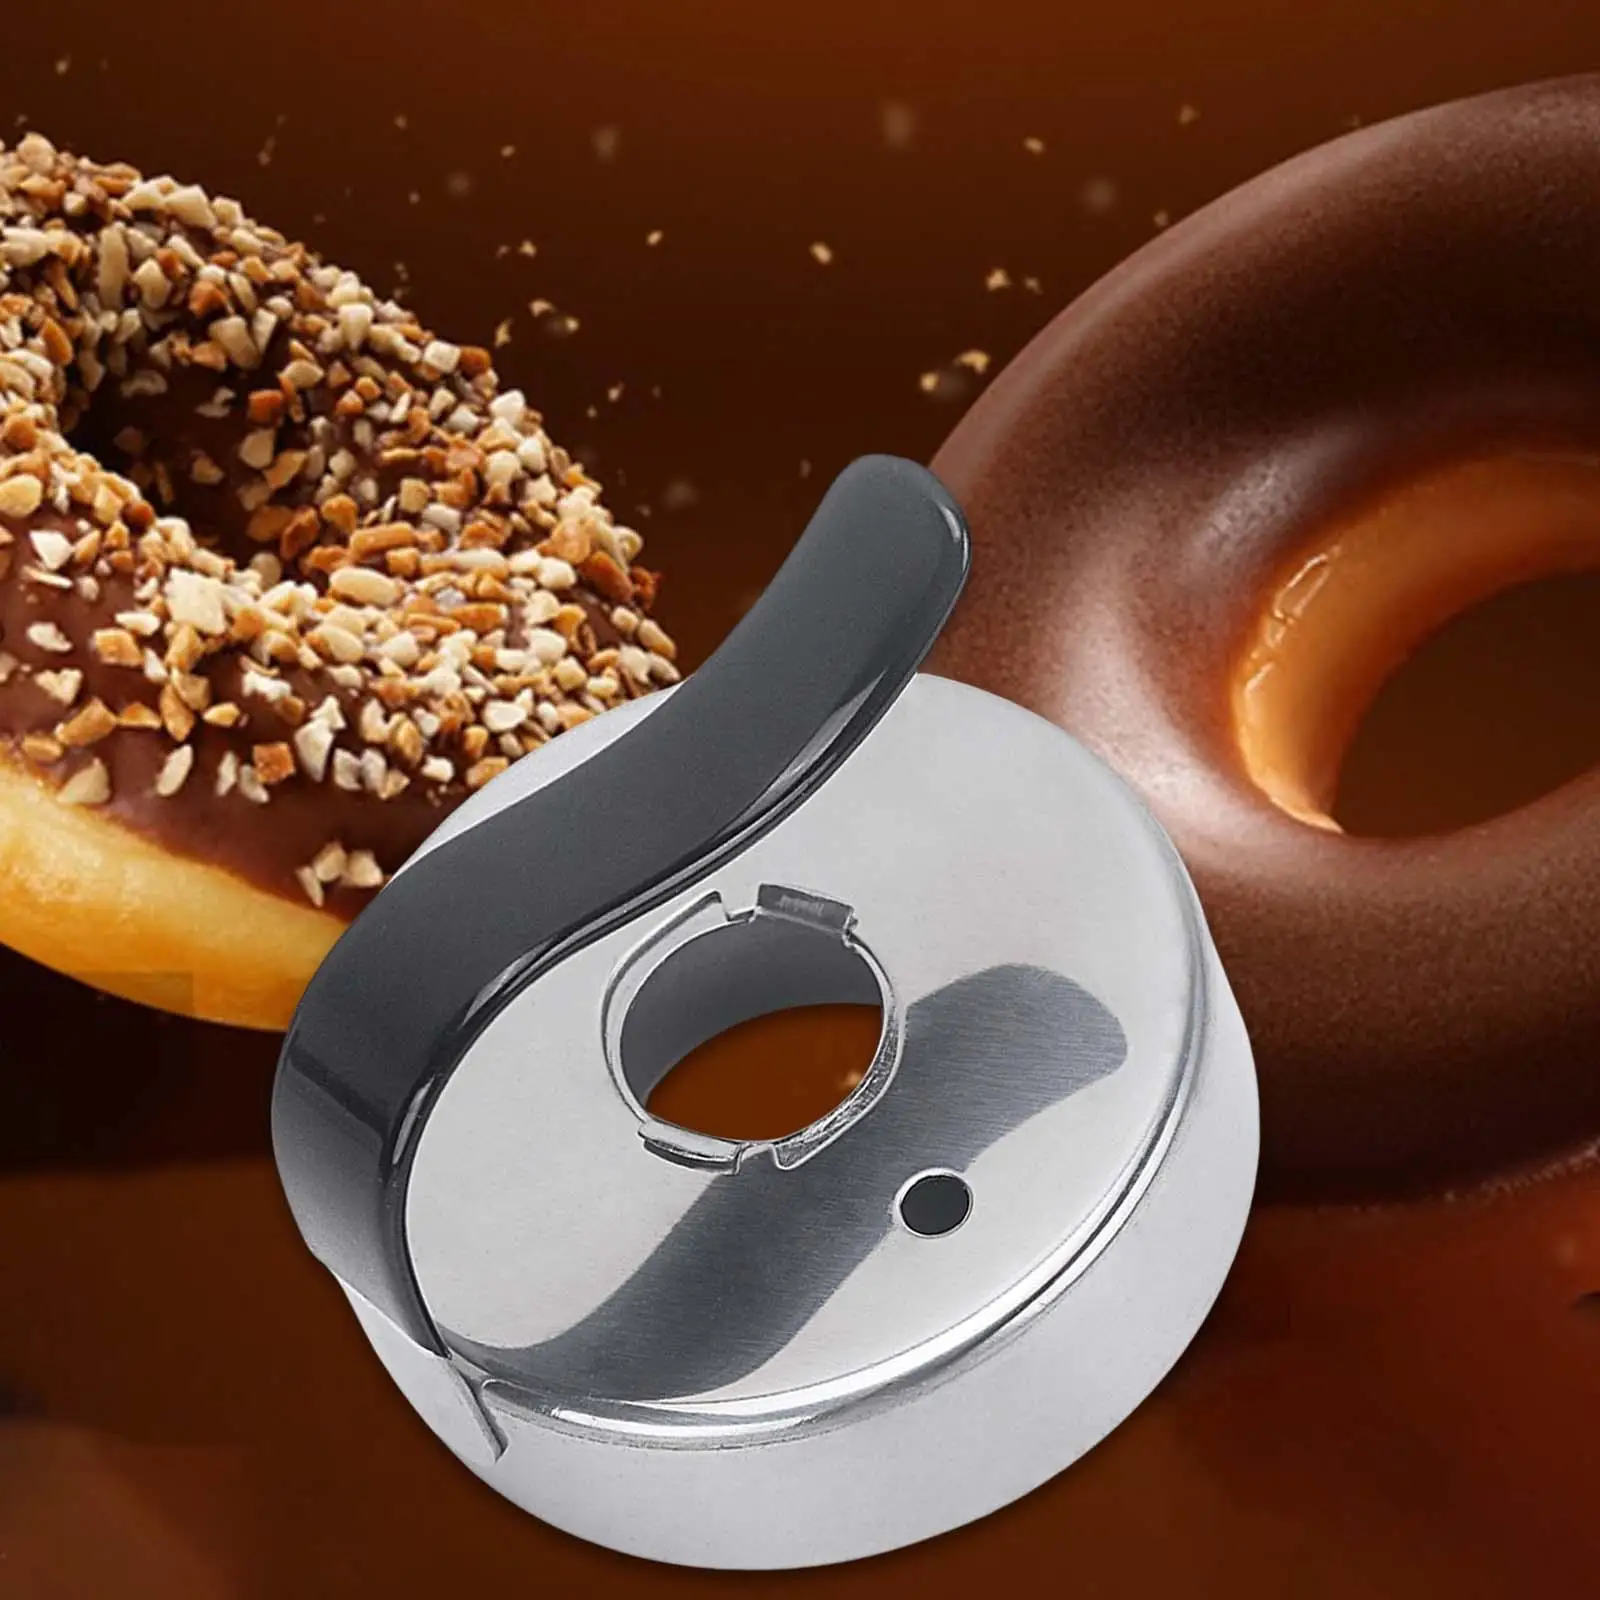 Mousse Circle, Easy to Clean Round Pastry Mousse Muffin mould Cake rings Donut Bakeware, Cake mould, for Cooking Family Baking